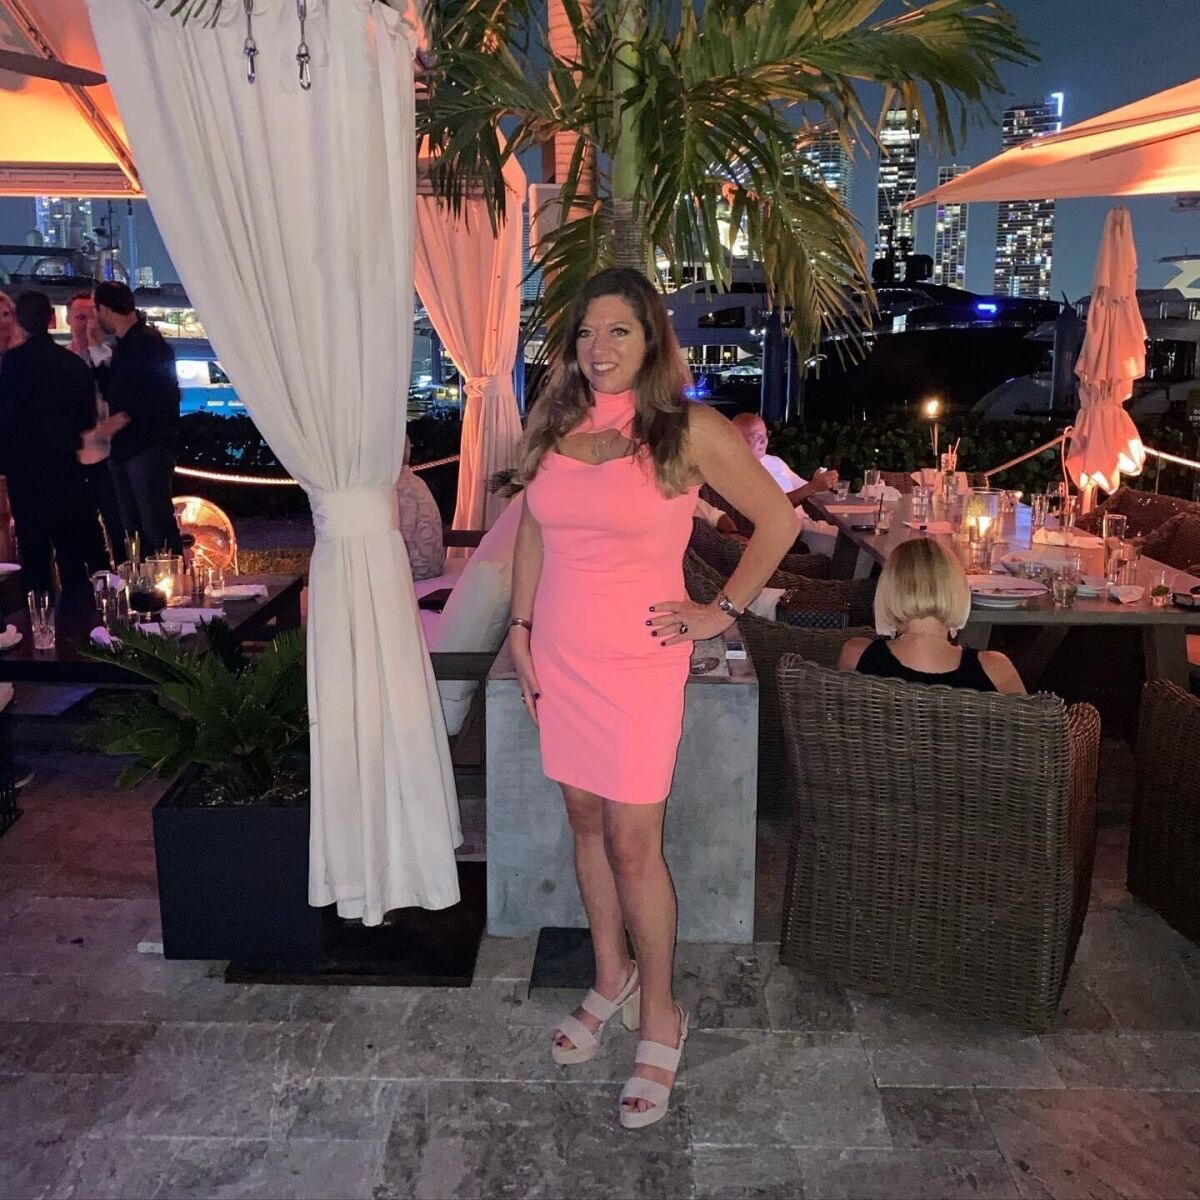 A woman in a coral pink dress stands near diners at tables, with the skyscrapers in the background